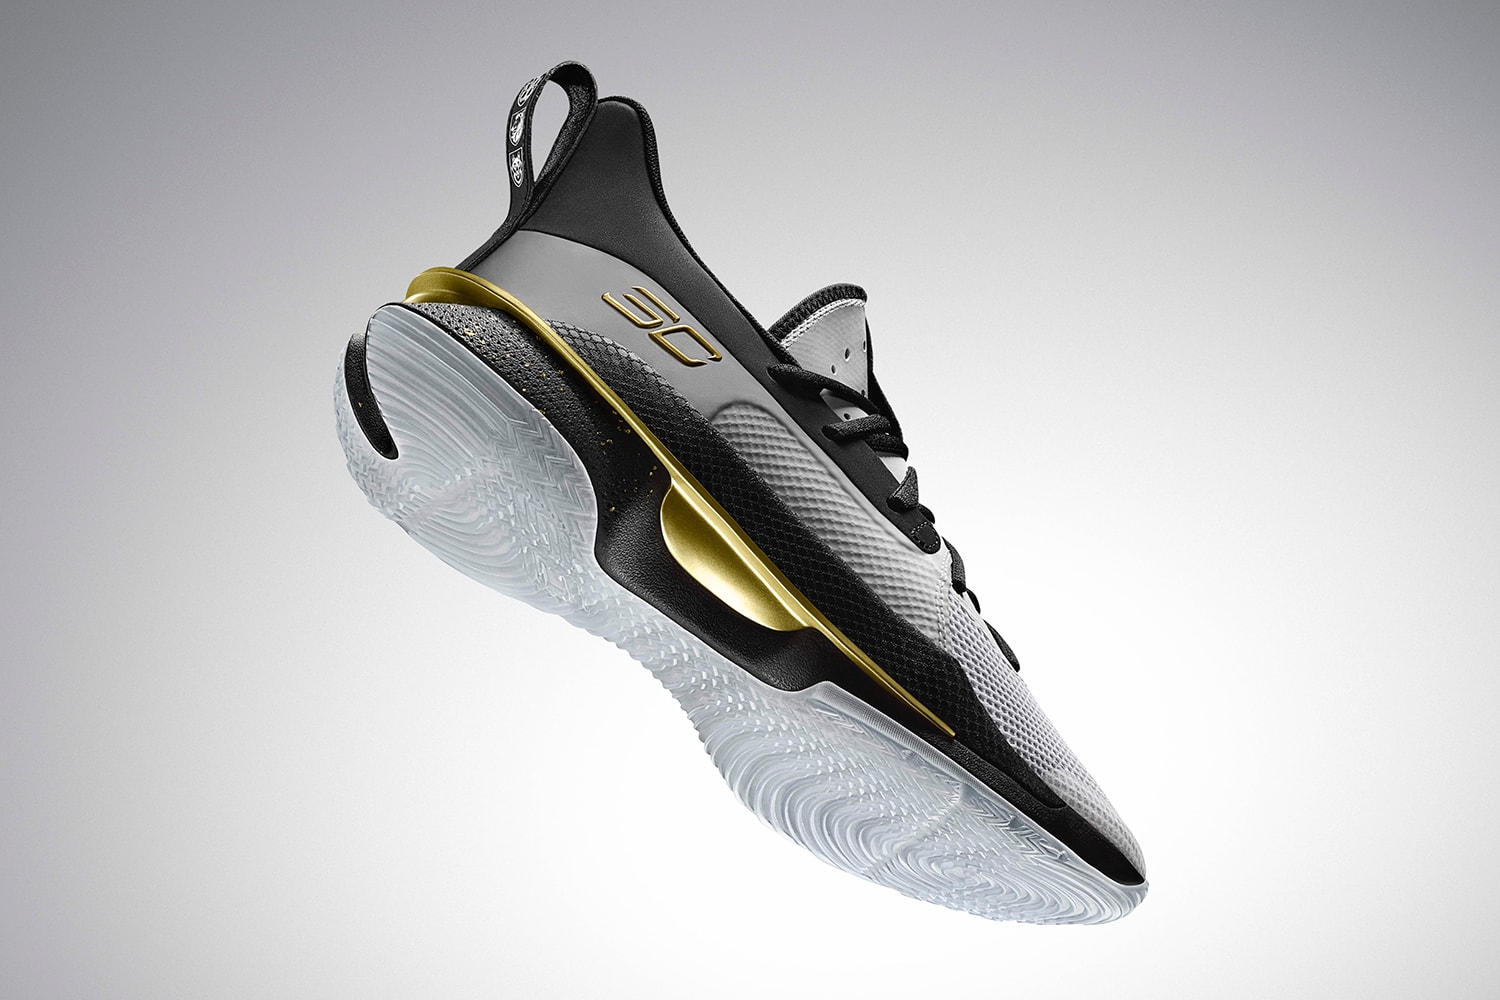 Under Armour Curry 7 全新配色「FOR THE GAME」登场